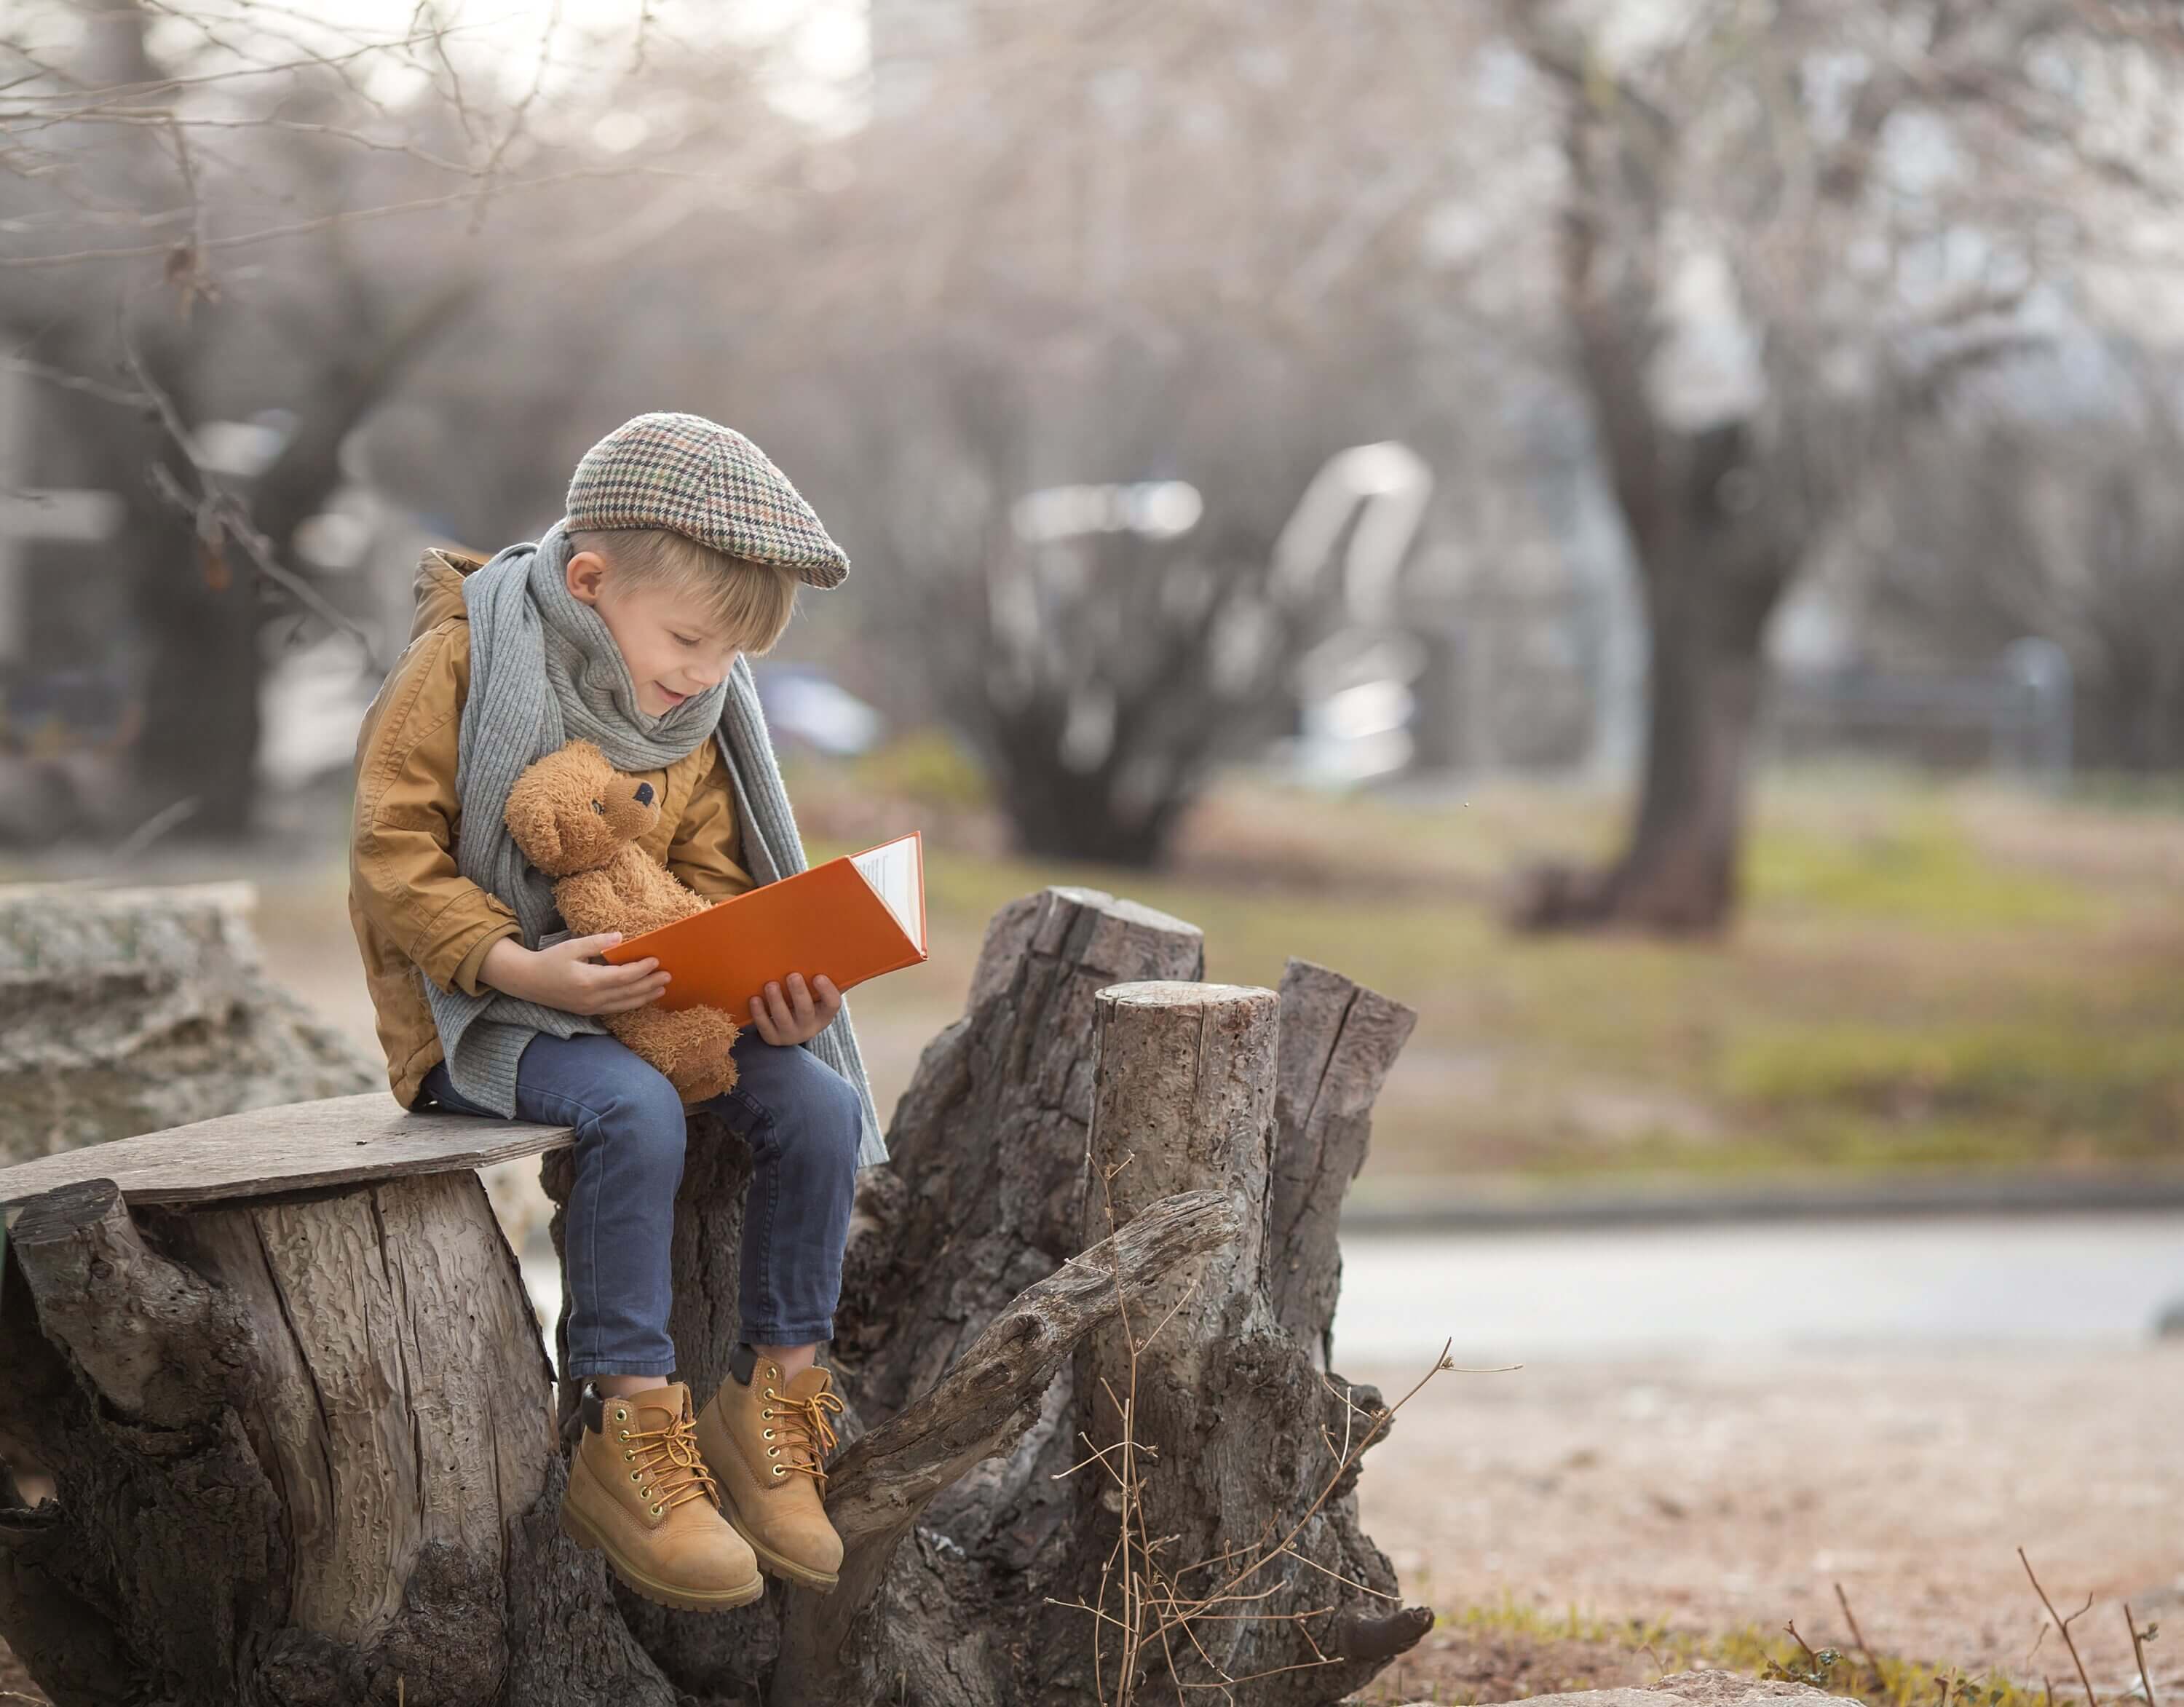 A young boy sits on a tree stump with his stuffed animal, reading a book.